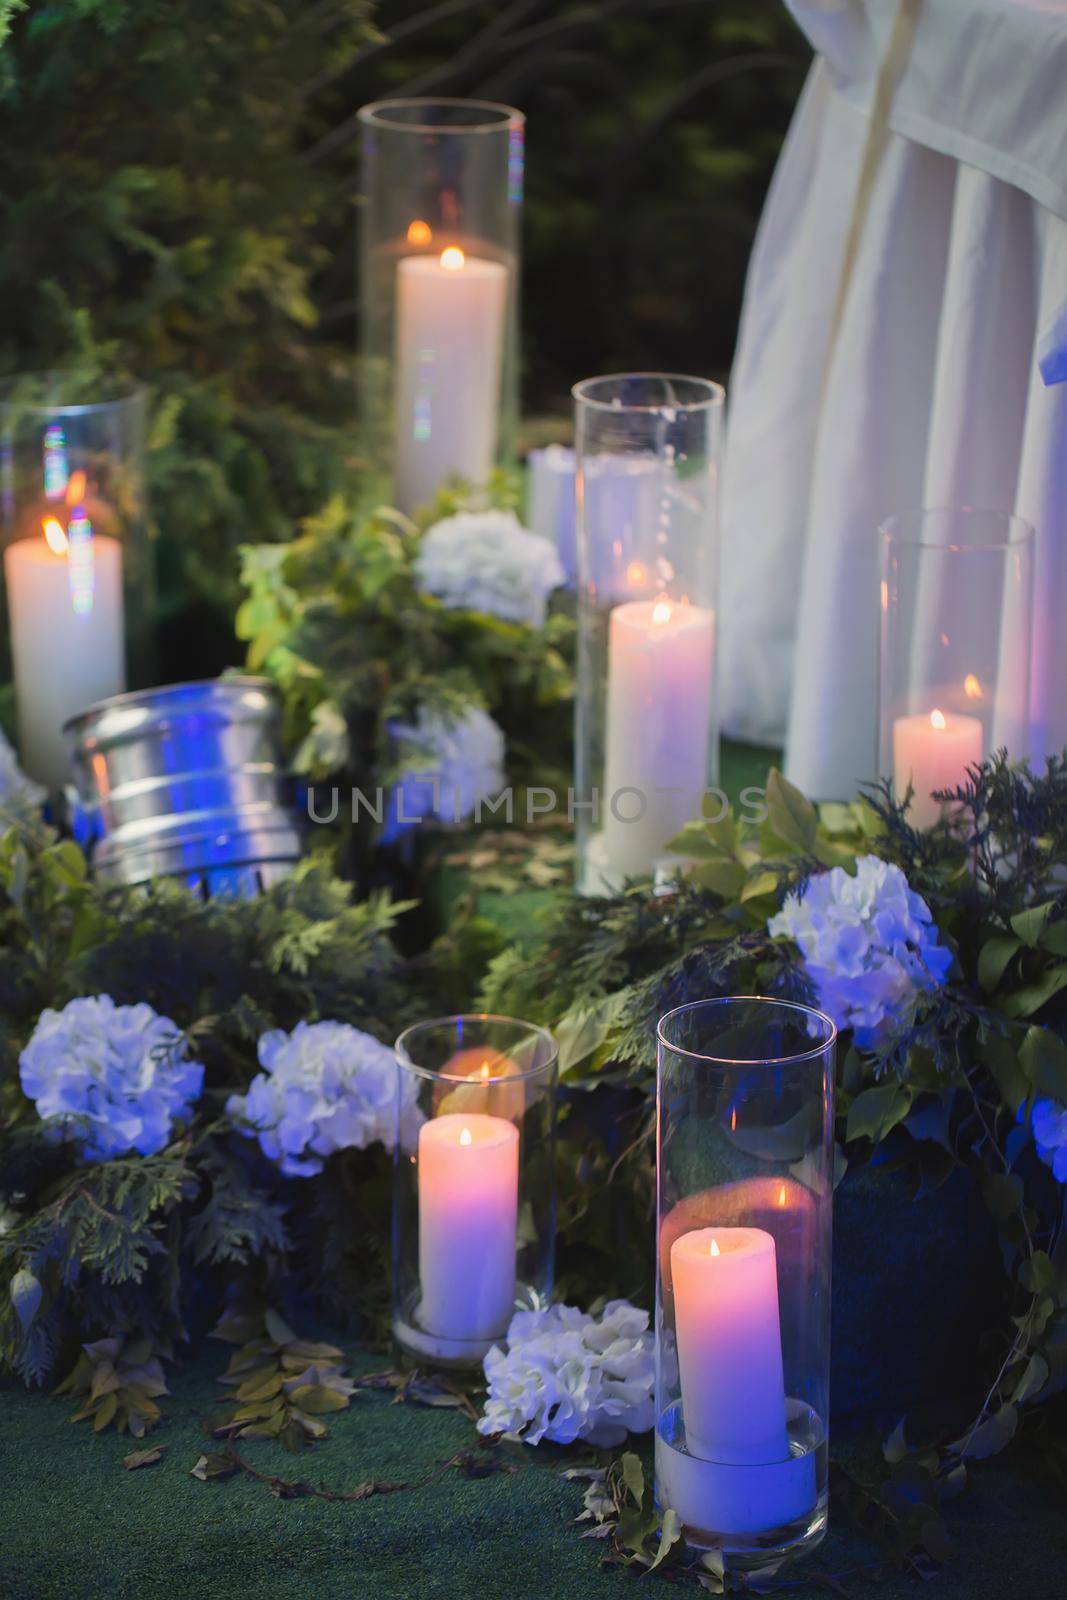 Arrangement of flowers, candles and green plants. by StudioPeace